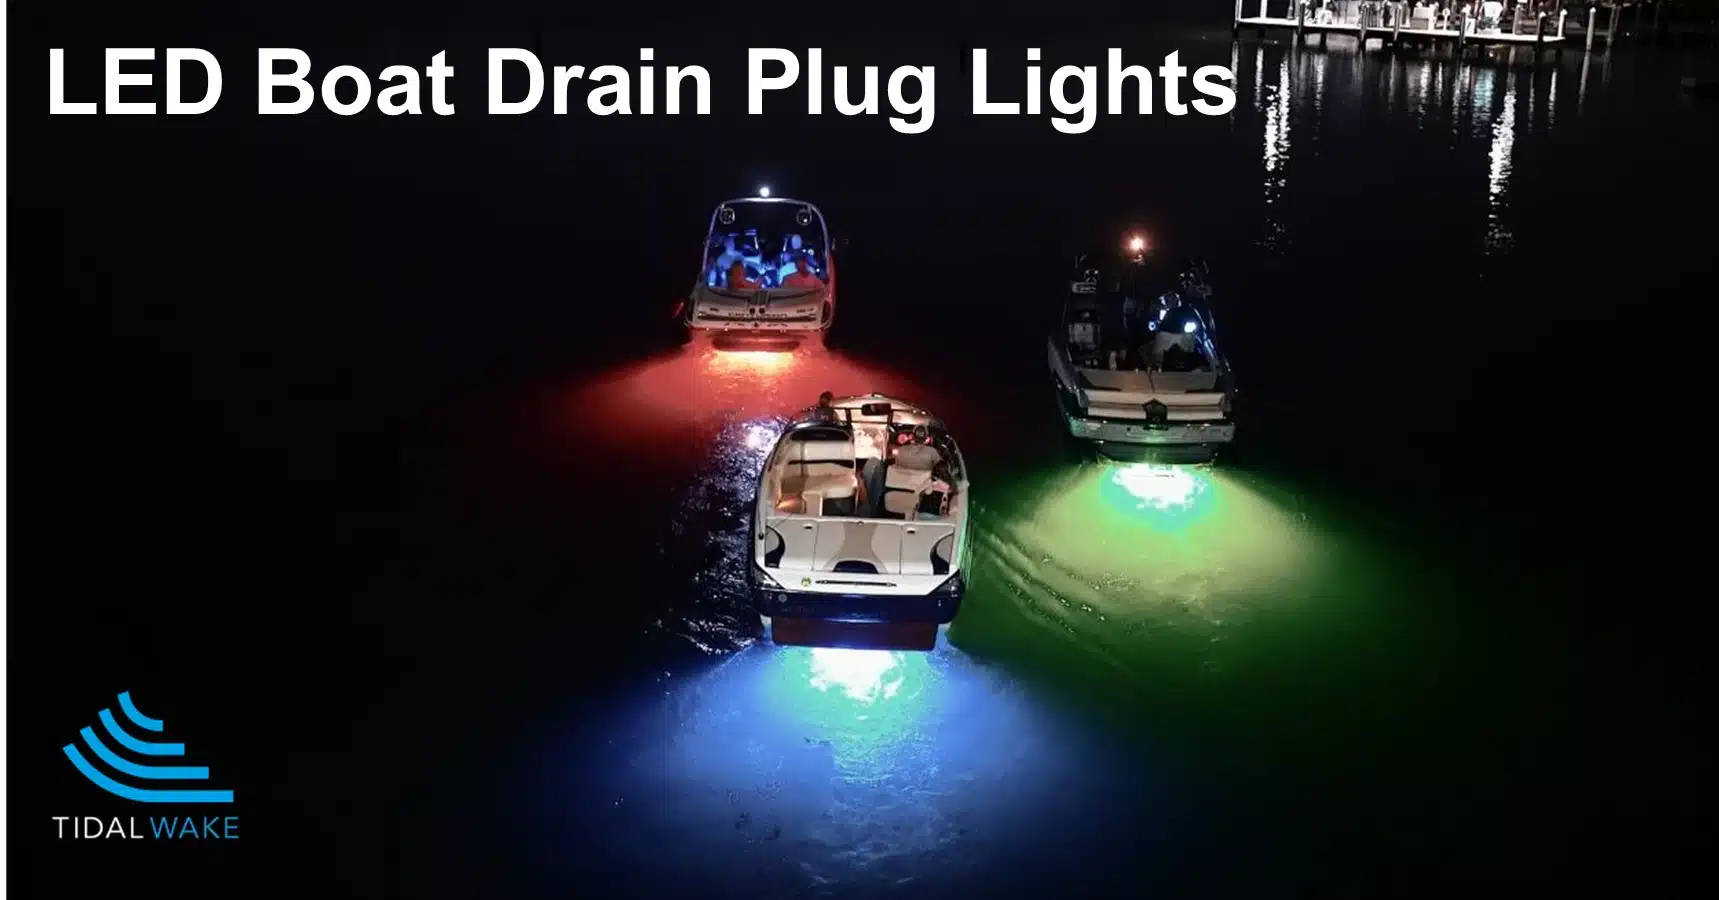 The Boats at night with Tidal Wake LED Lights on